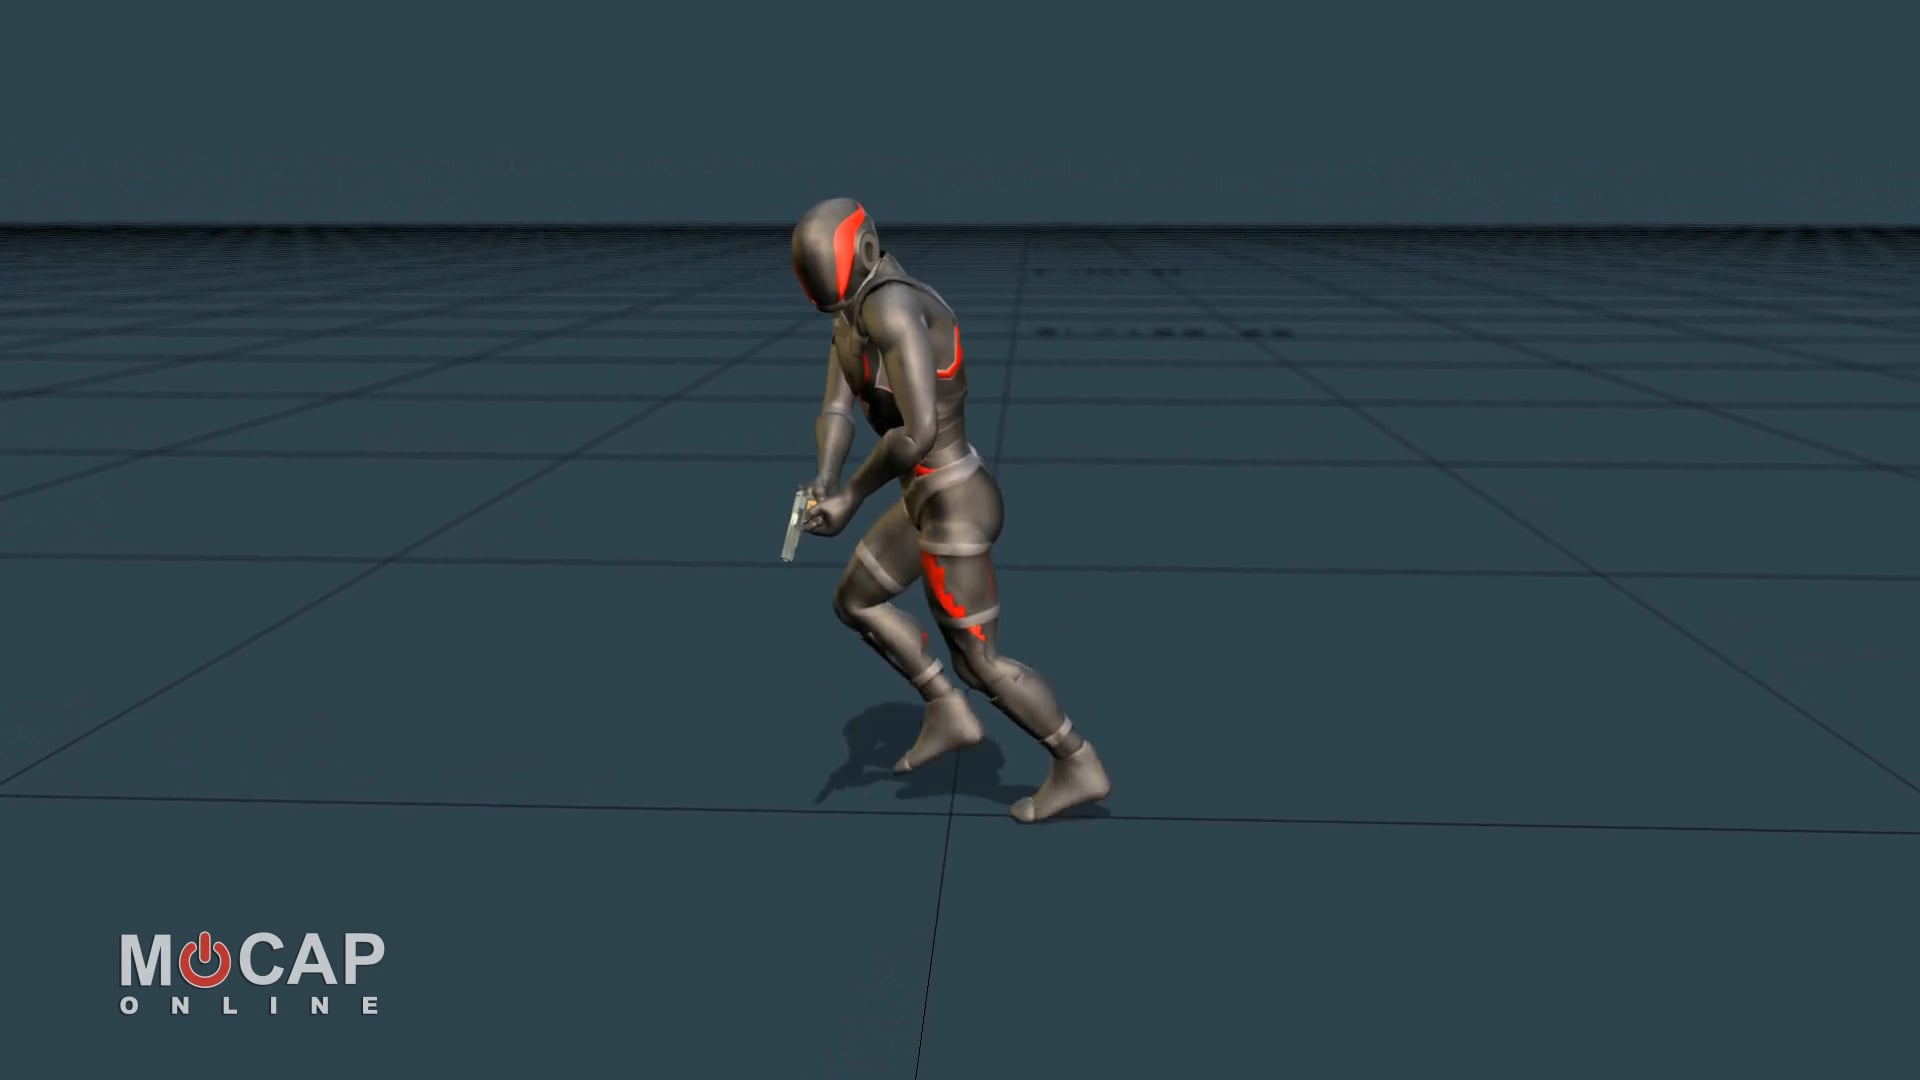 Shooter / Pistol MoCap (OVERVIEW) ~ 3D Character Animations by MoCap Online on Vimeo